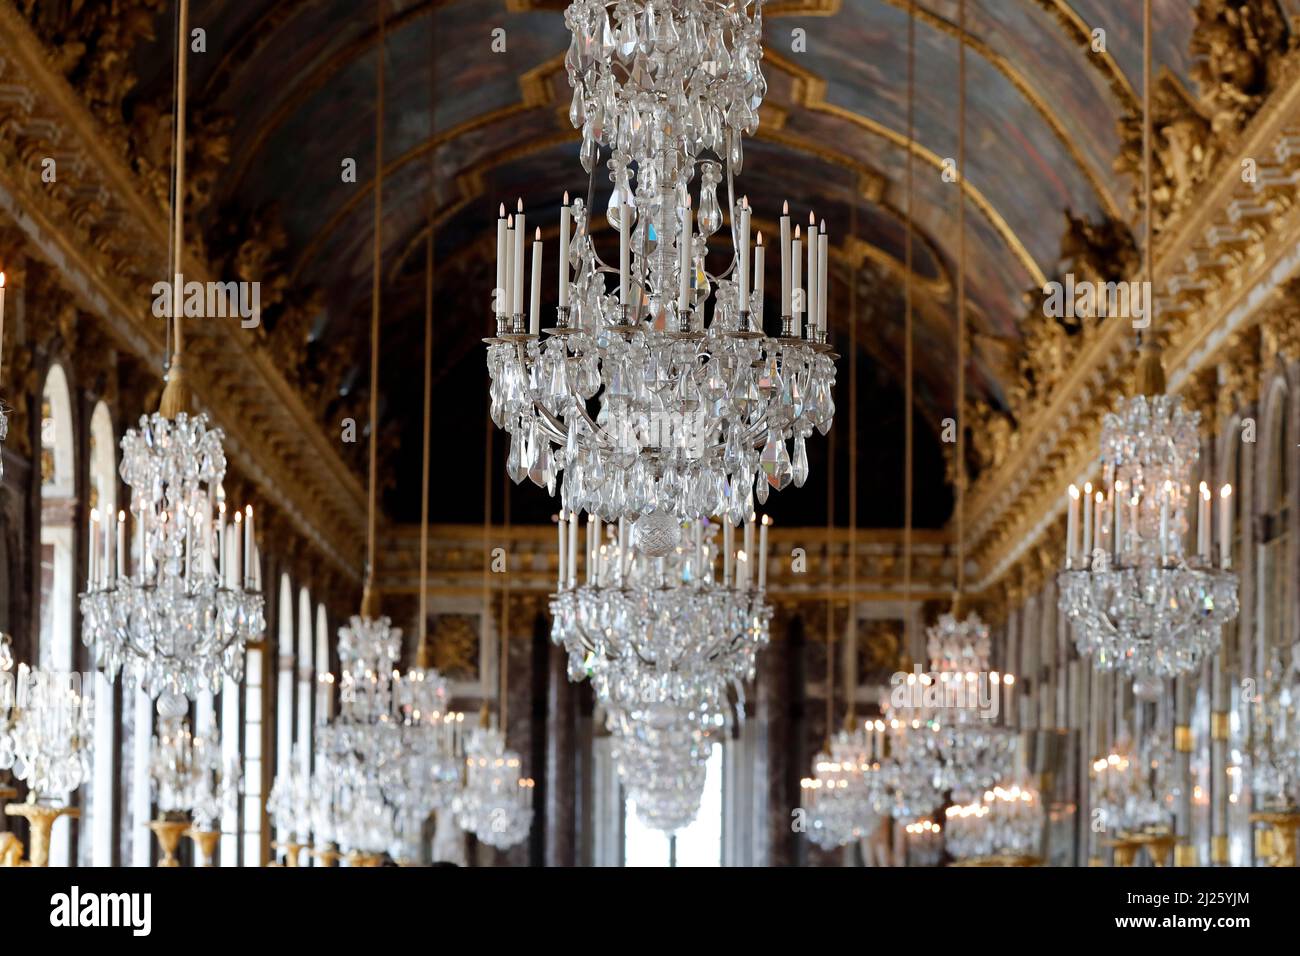 Palace of Versailles interior. Galerie des Glaces. Stock Photo